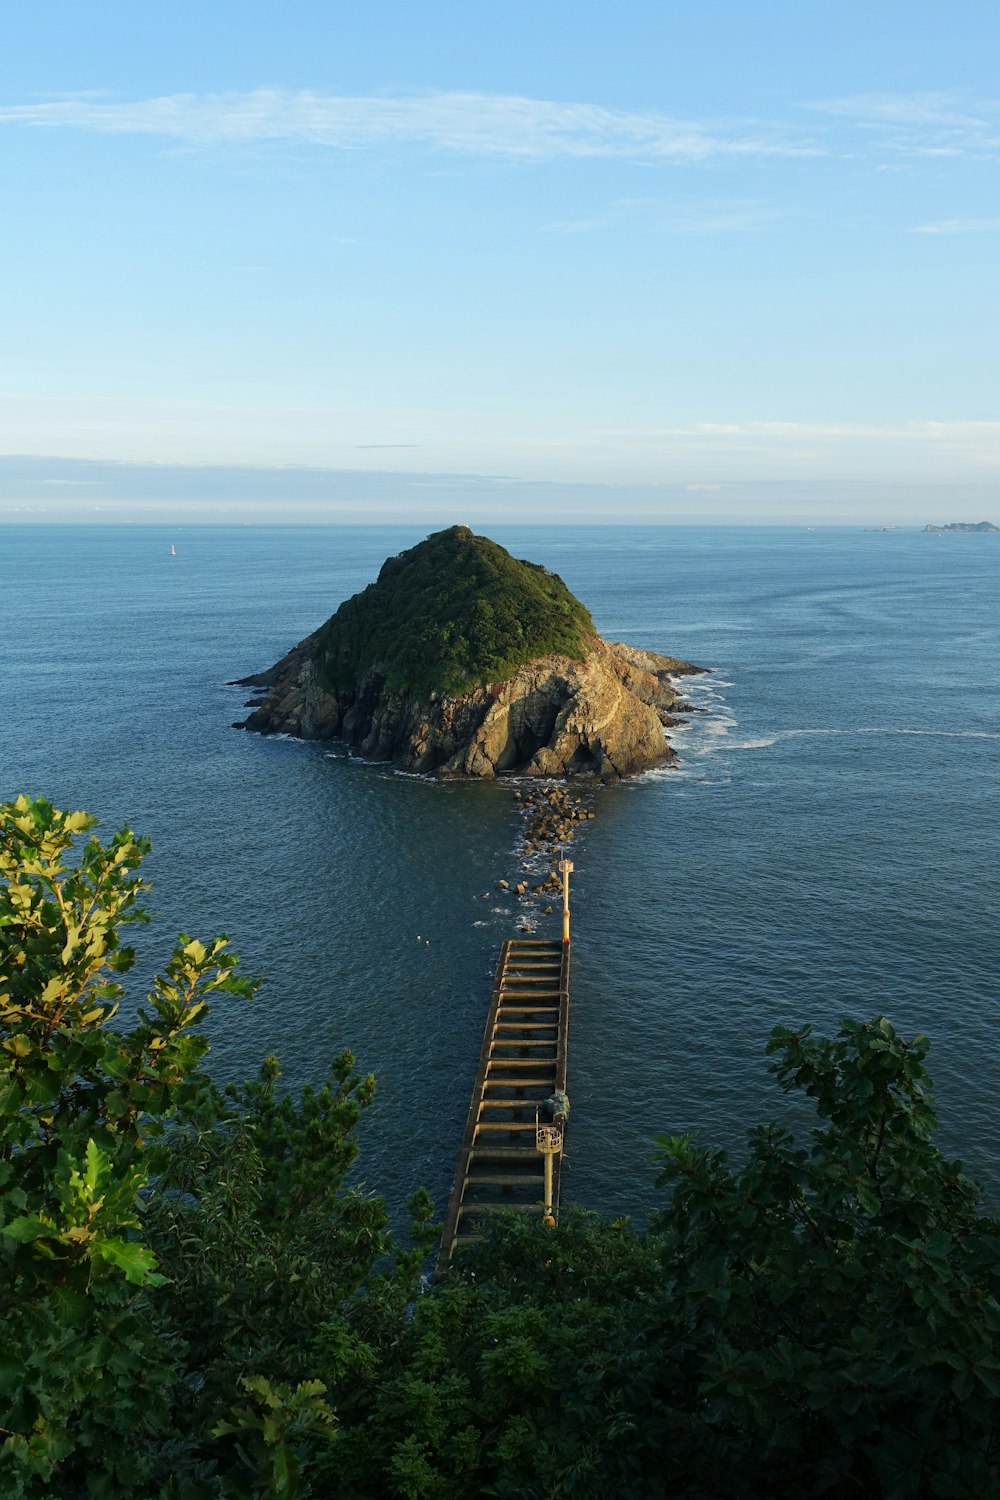 a wooden walkway leading to a small island in the middle of the ocean